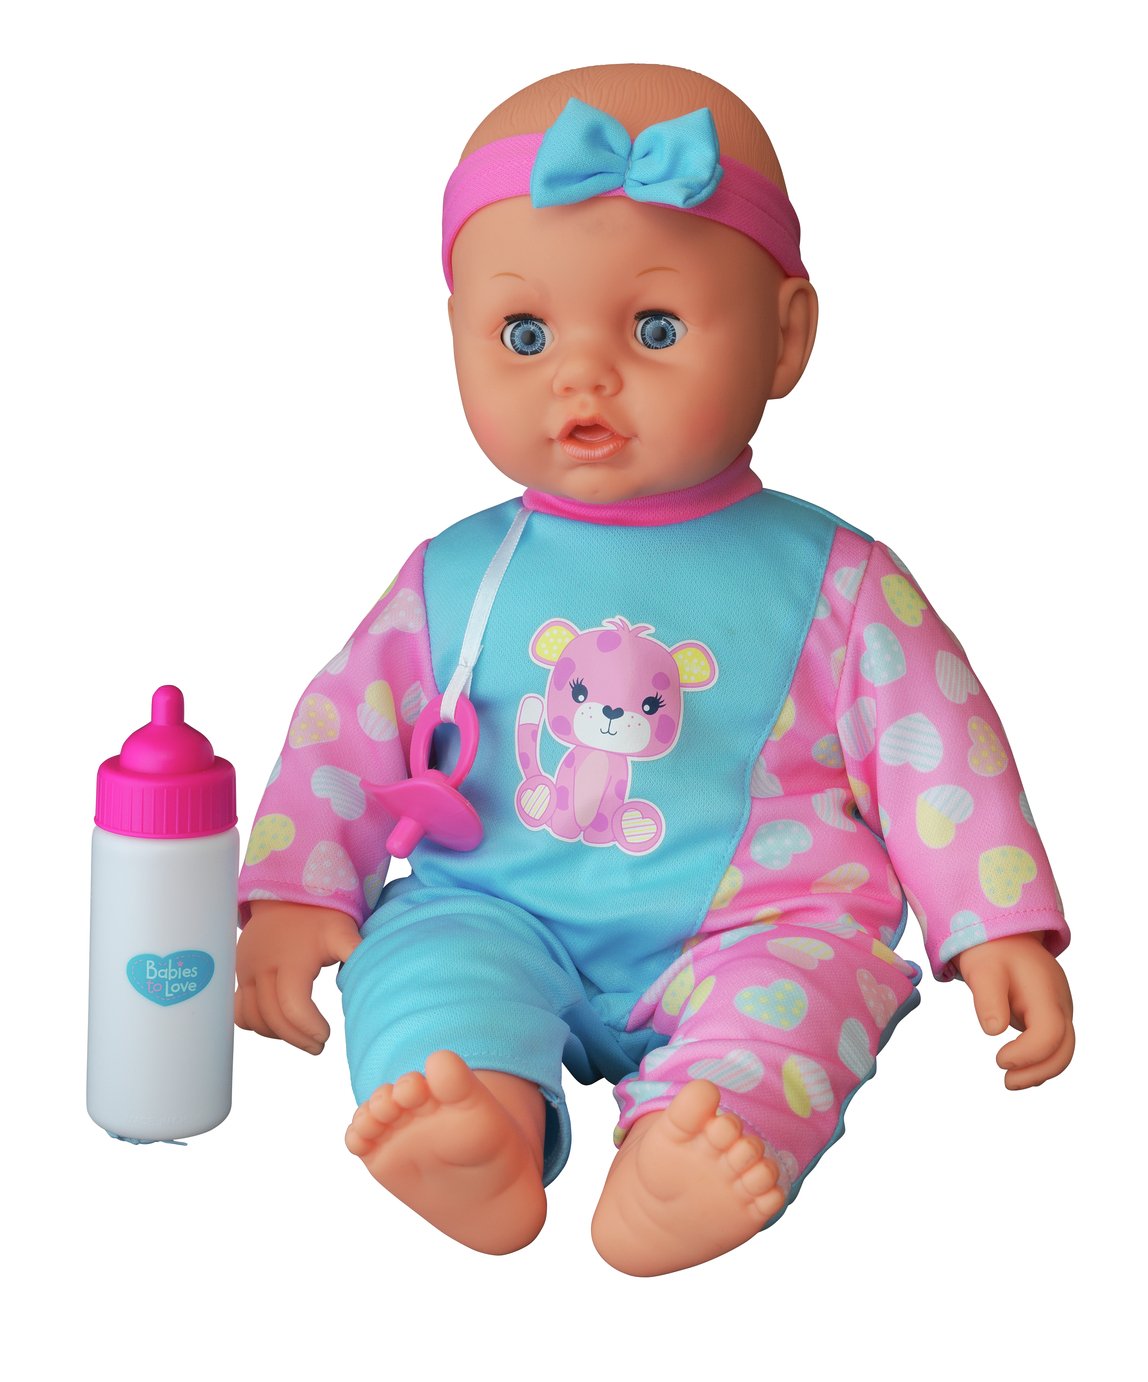 Chad Valley Babies To Love Interactive Lily Doll Reviews Updated